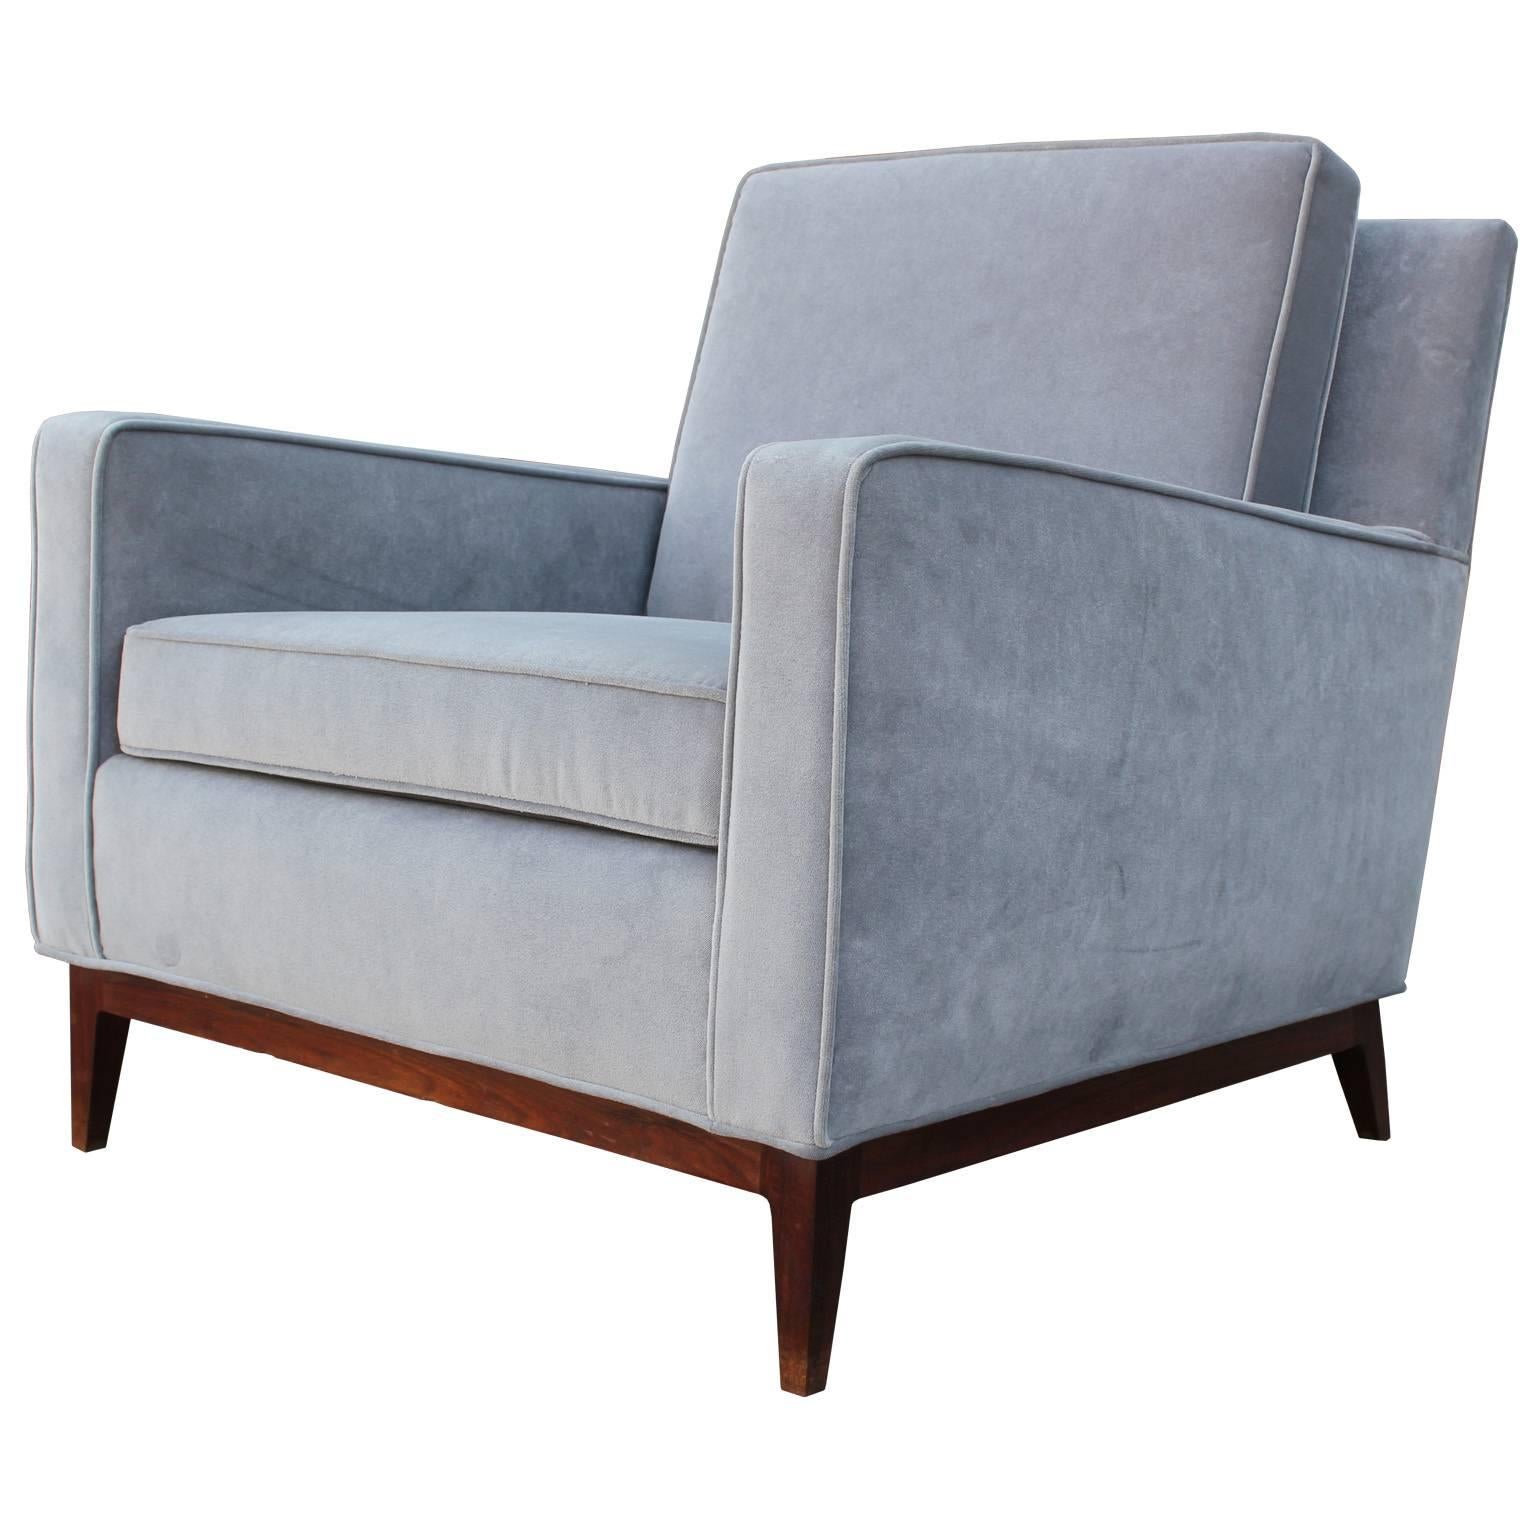 Wonderful pair of lounge chairs attributed to Paul McCobb. Chairs have perfect proportions and classic lines which make them perfect in virtually any interior. Chairs are freshly upholstered in soft grey velvet. Walnut bases complete the chairs.